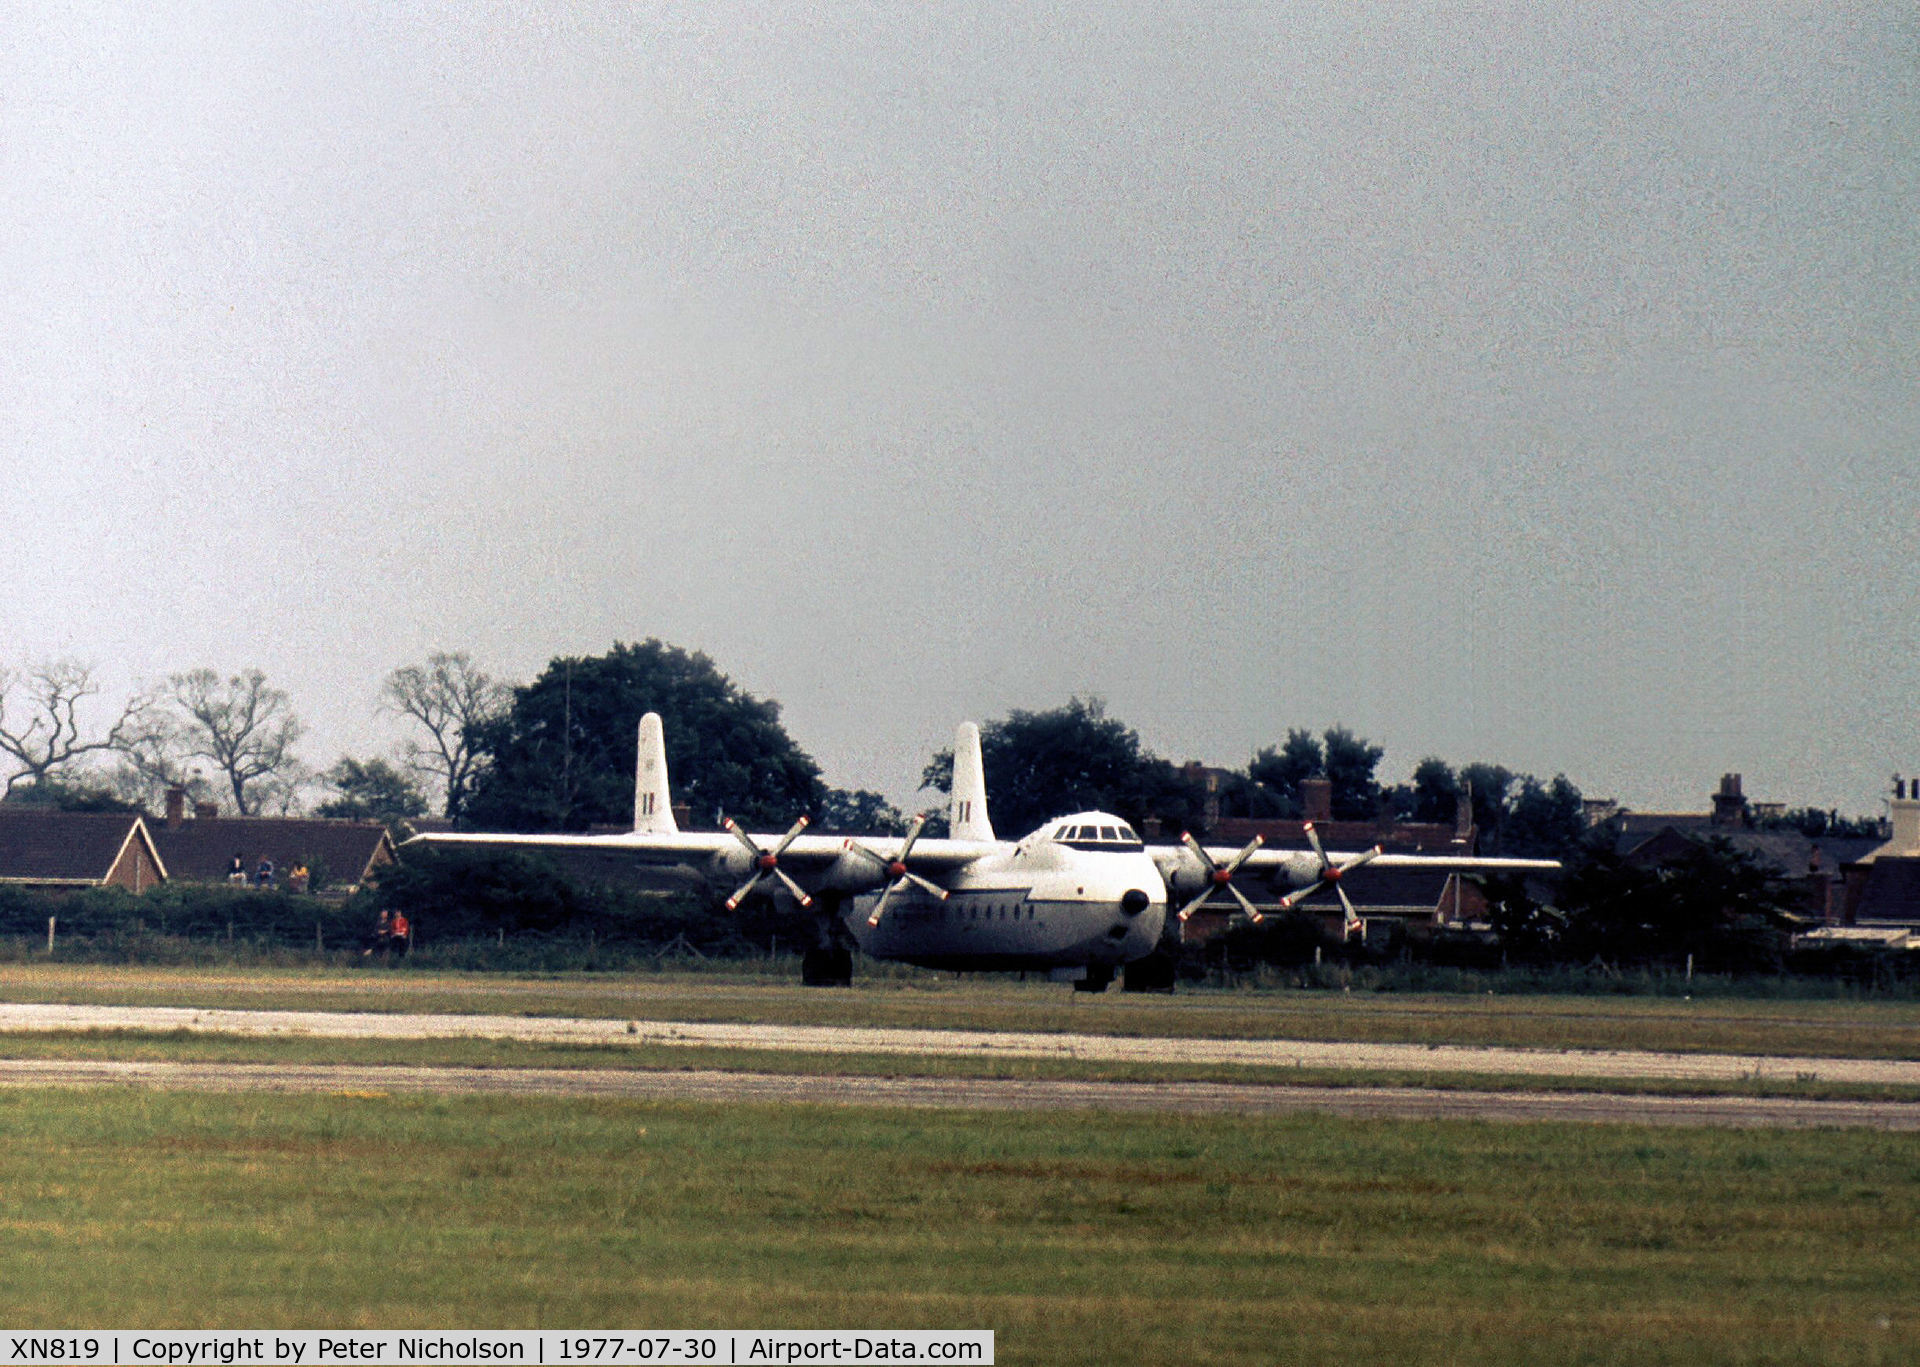 XN819, 1961 Armstrong Whitworth AW-660 Argosy C.1 C/N 6748, Argosy C.1 with RAF Maintenance serial 8205M seen at RAF Finningley at the time of the Royal Review of July 1977.